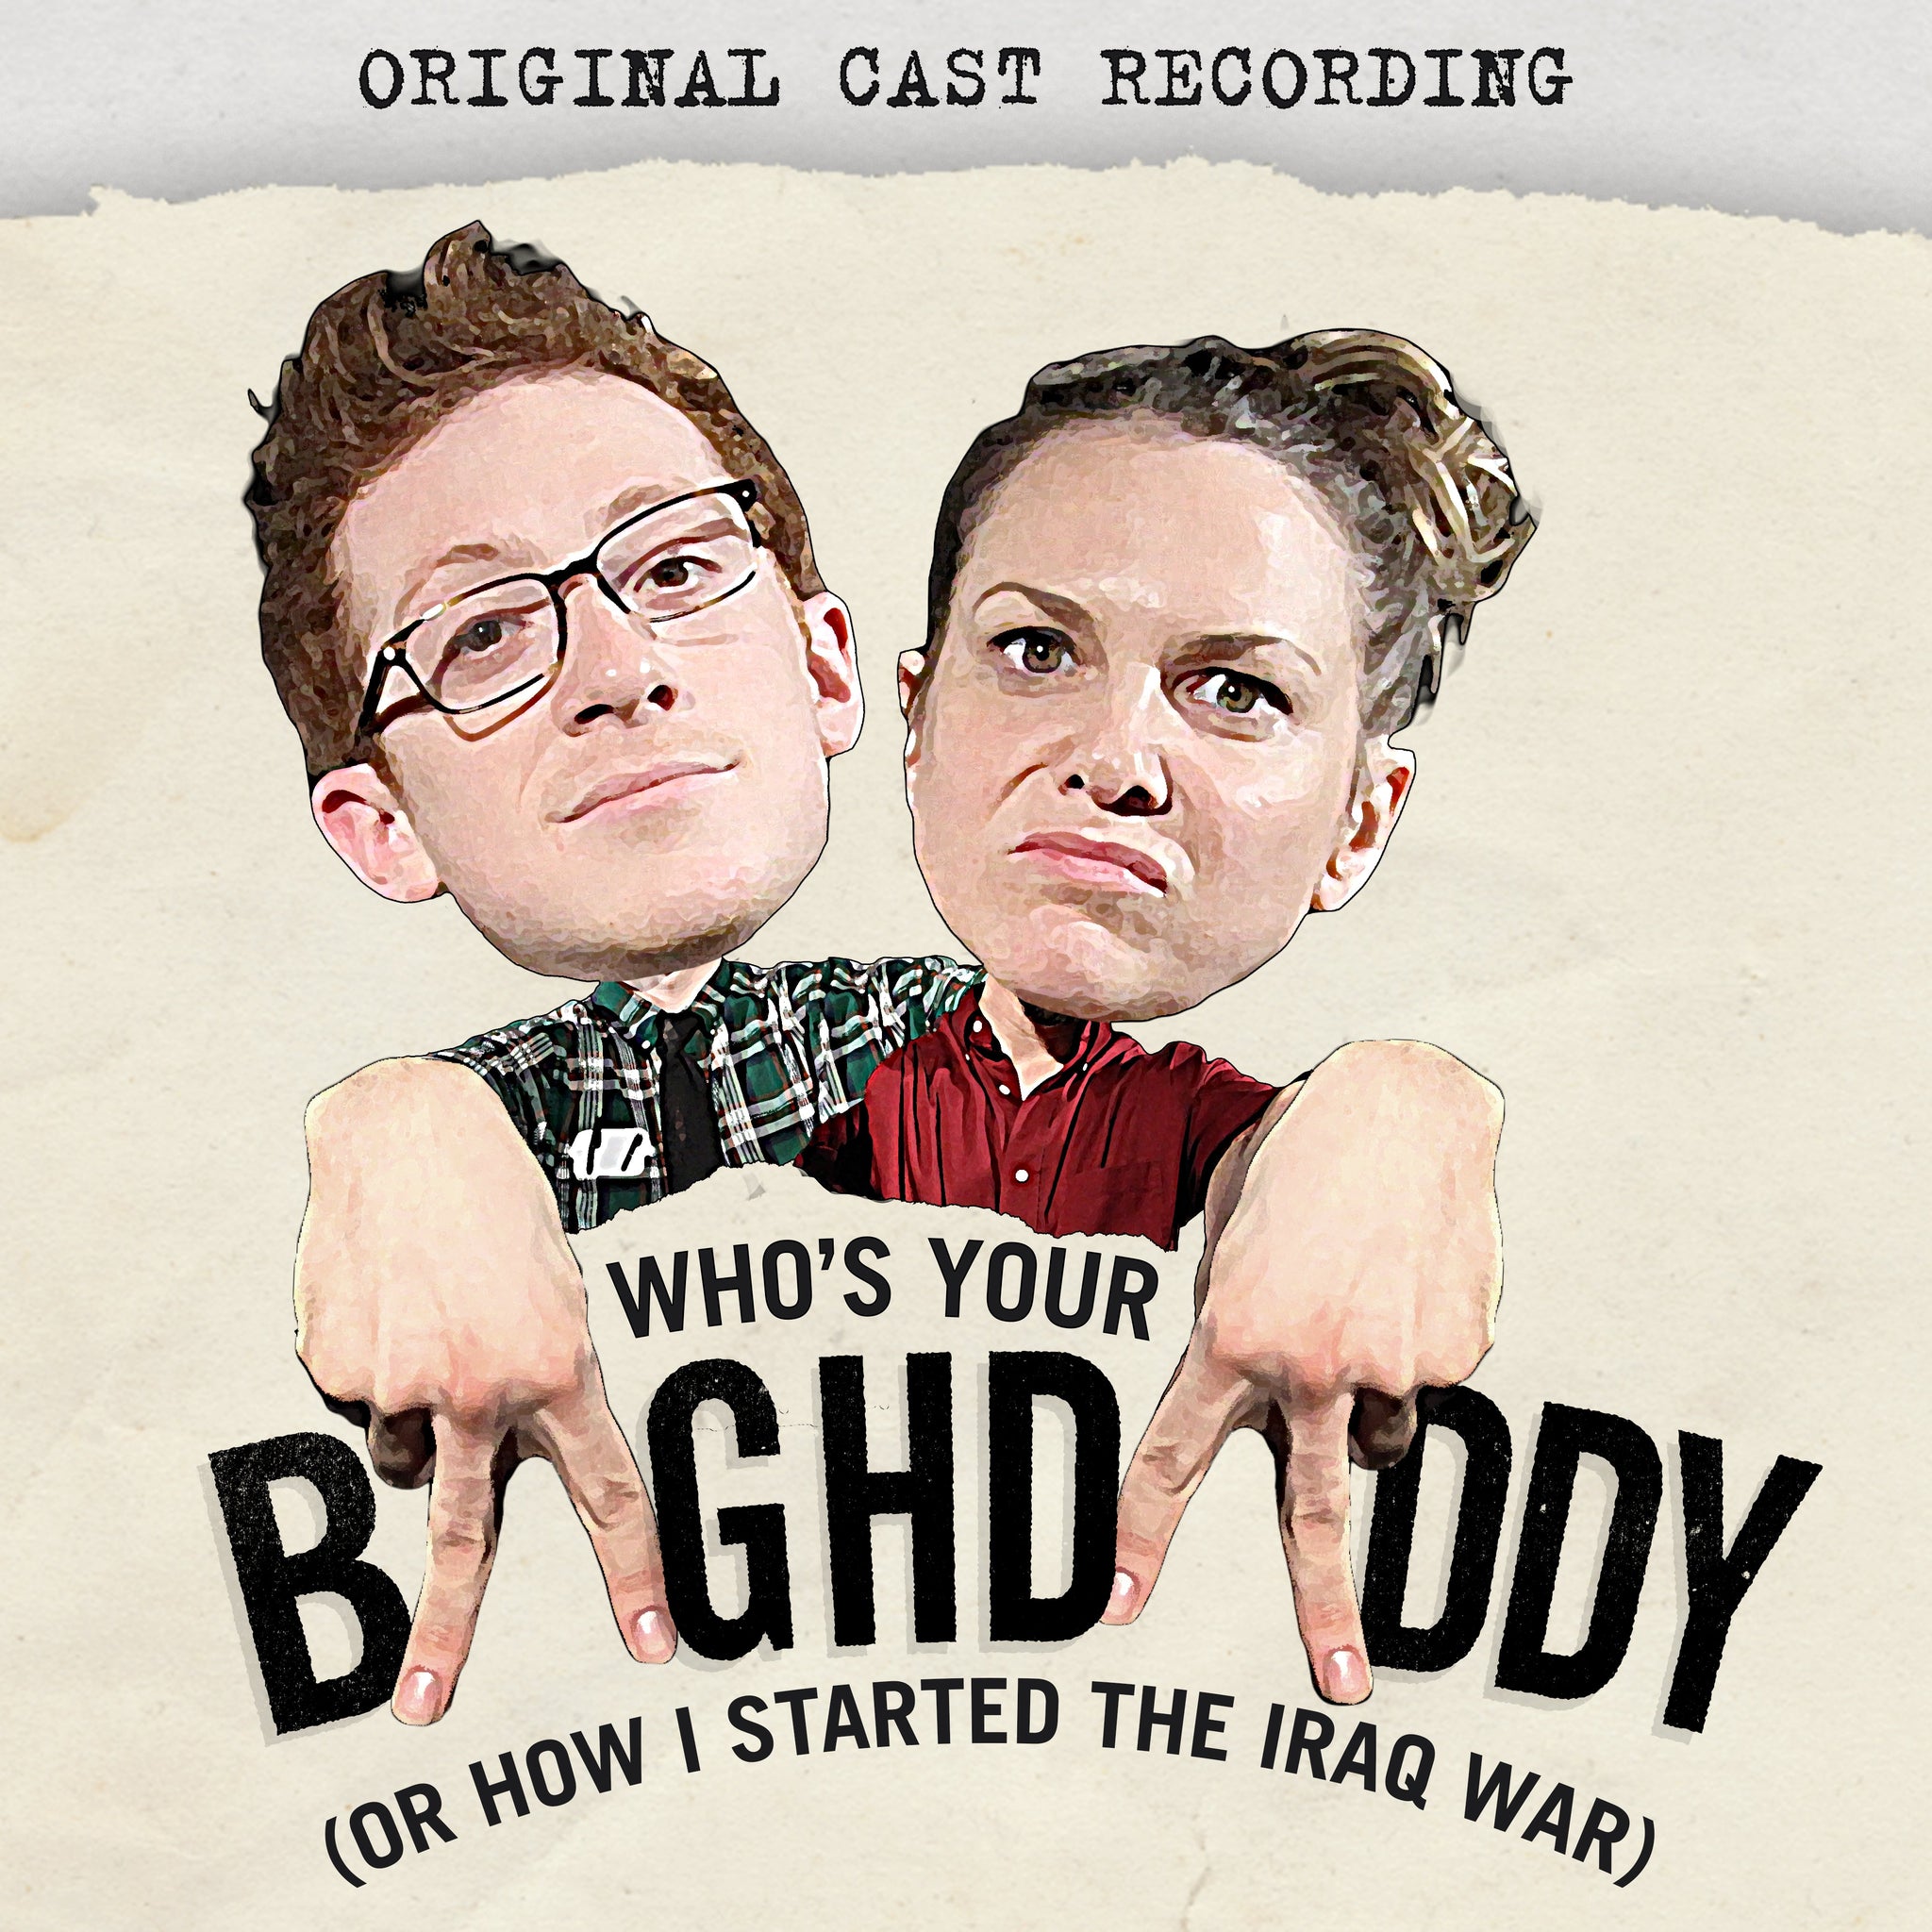 Who's Your Baghdaddy, or How I Started the Iraq War (Original Cast Recording) [Signed CD]